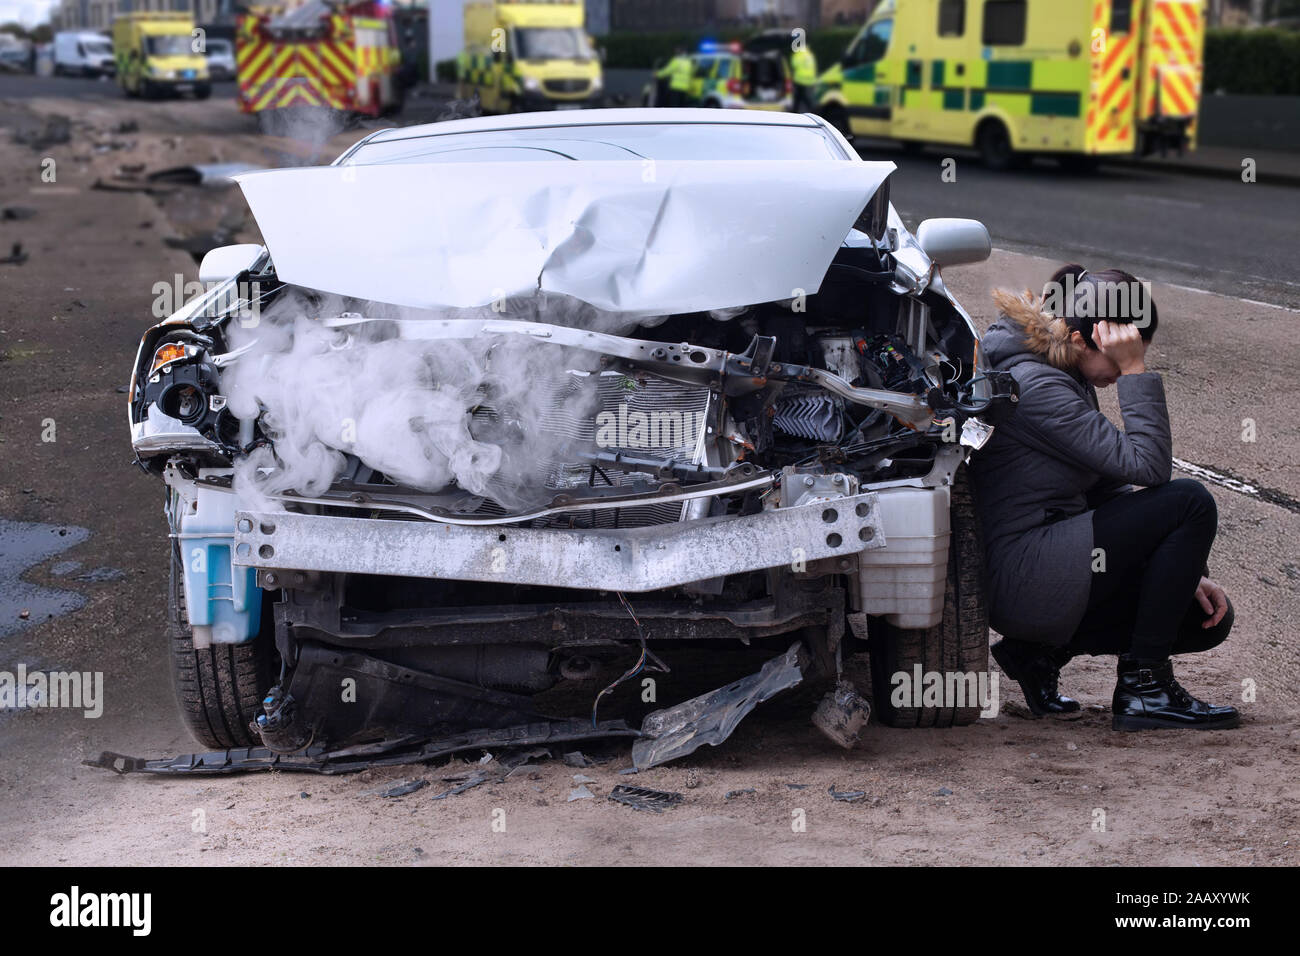 Woman after car accident in the city. Car crash from car accident on the road. Stock Photo